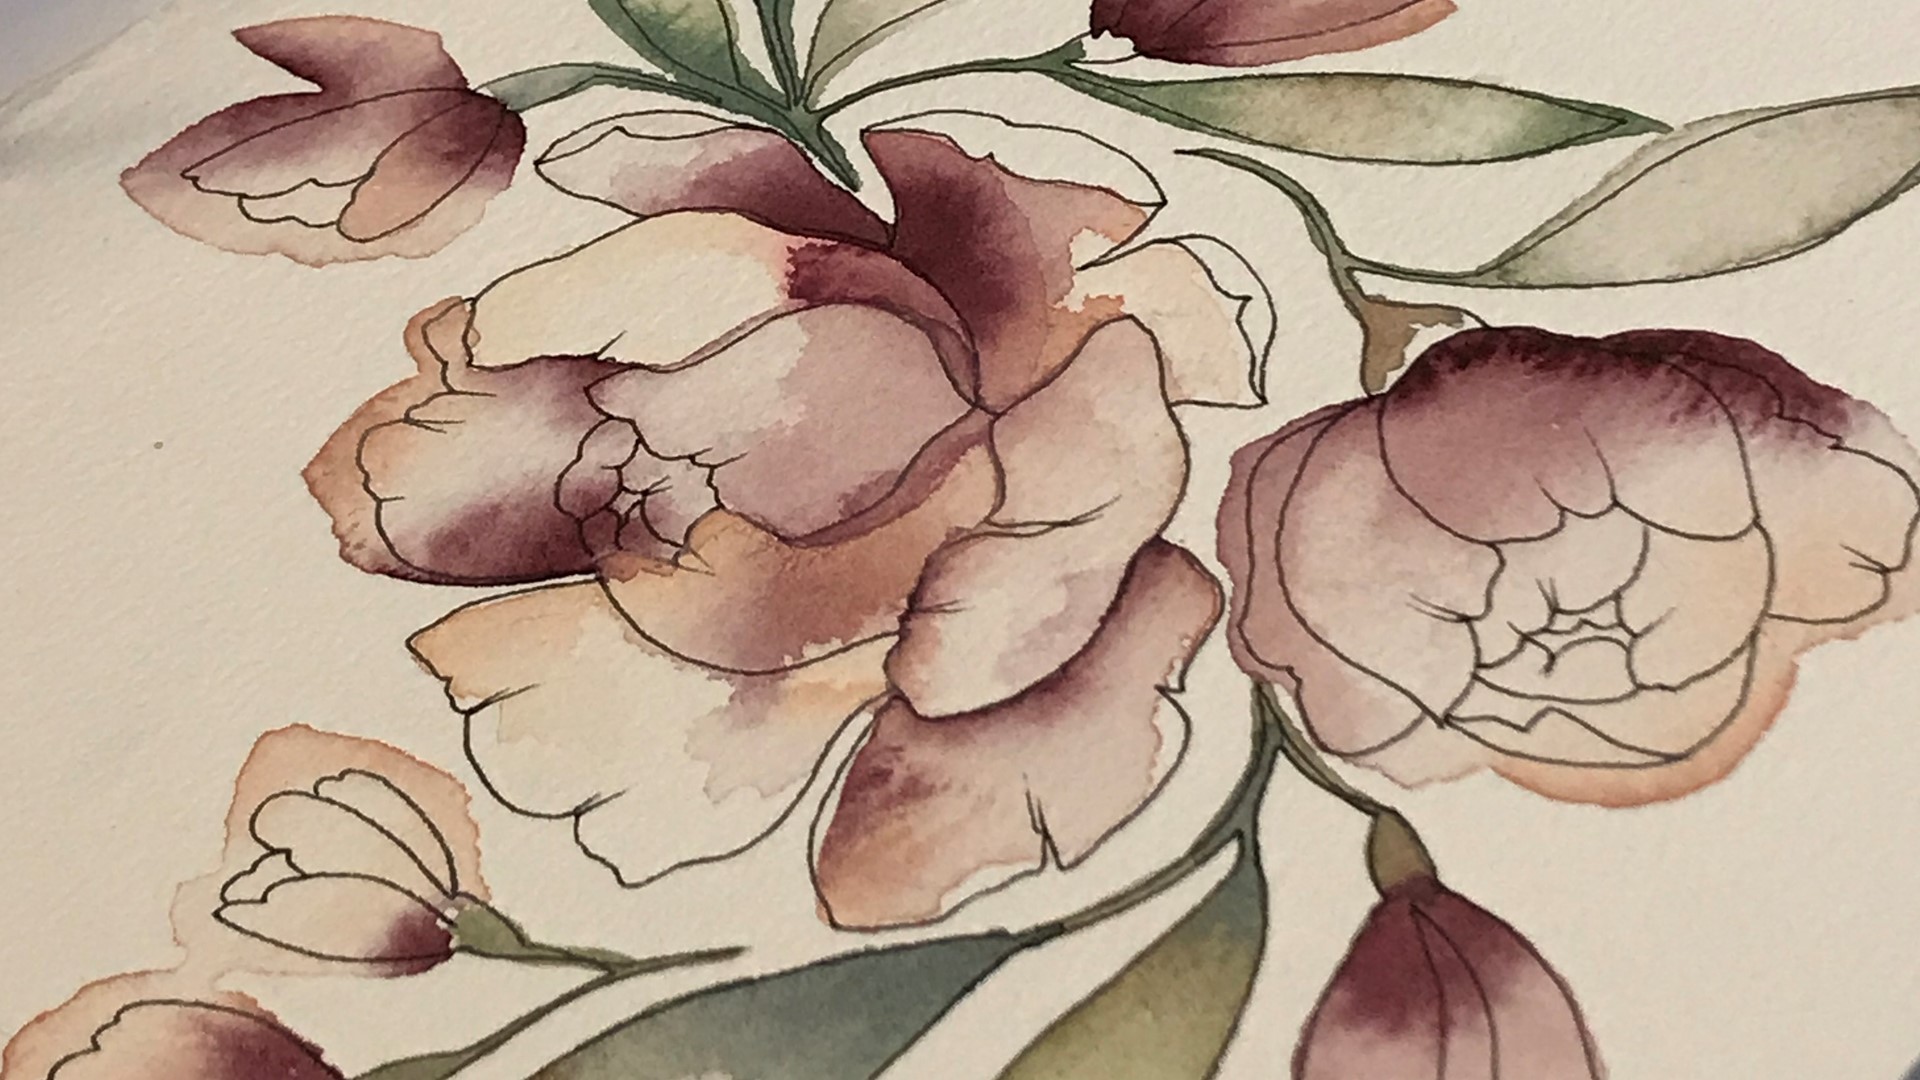 Author Sarah Simon's new book Modern Watercolor Botanicals gives budding artists 16 easy-to-follow lessons to take their painting skills to the next level.